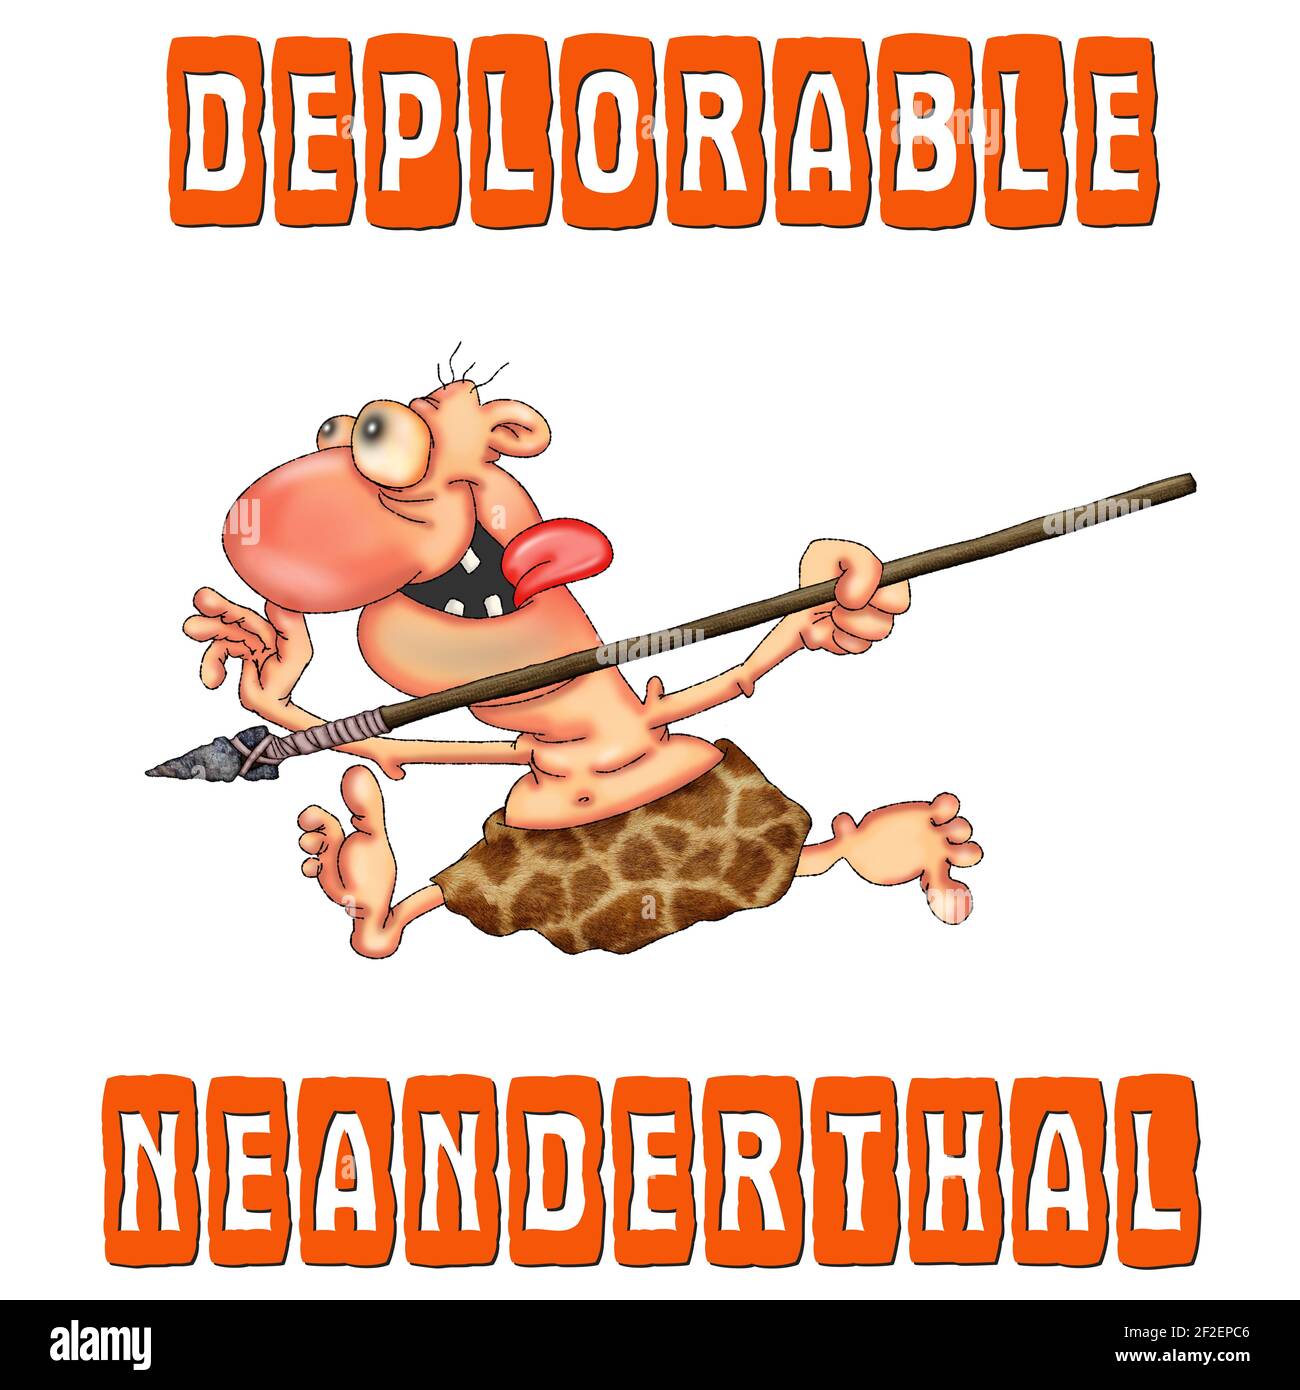 Deplorable neanderthal. Cartoon funny character for print and stickers.. Stock Photo